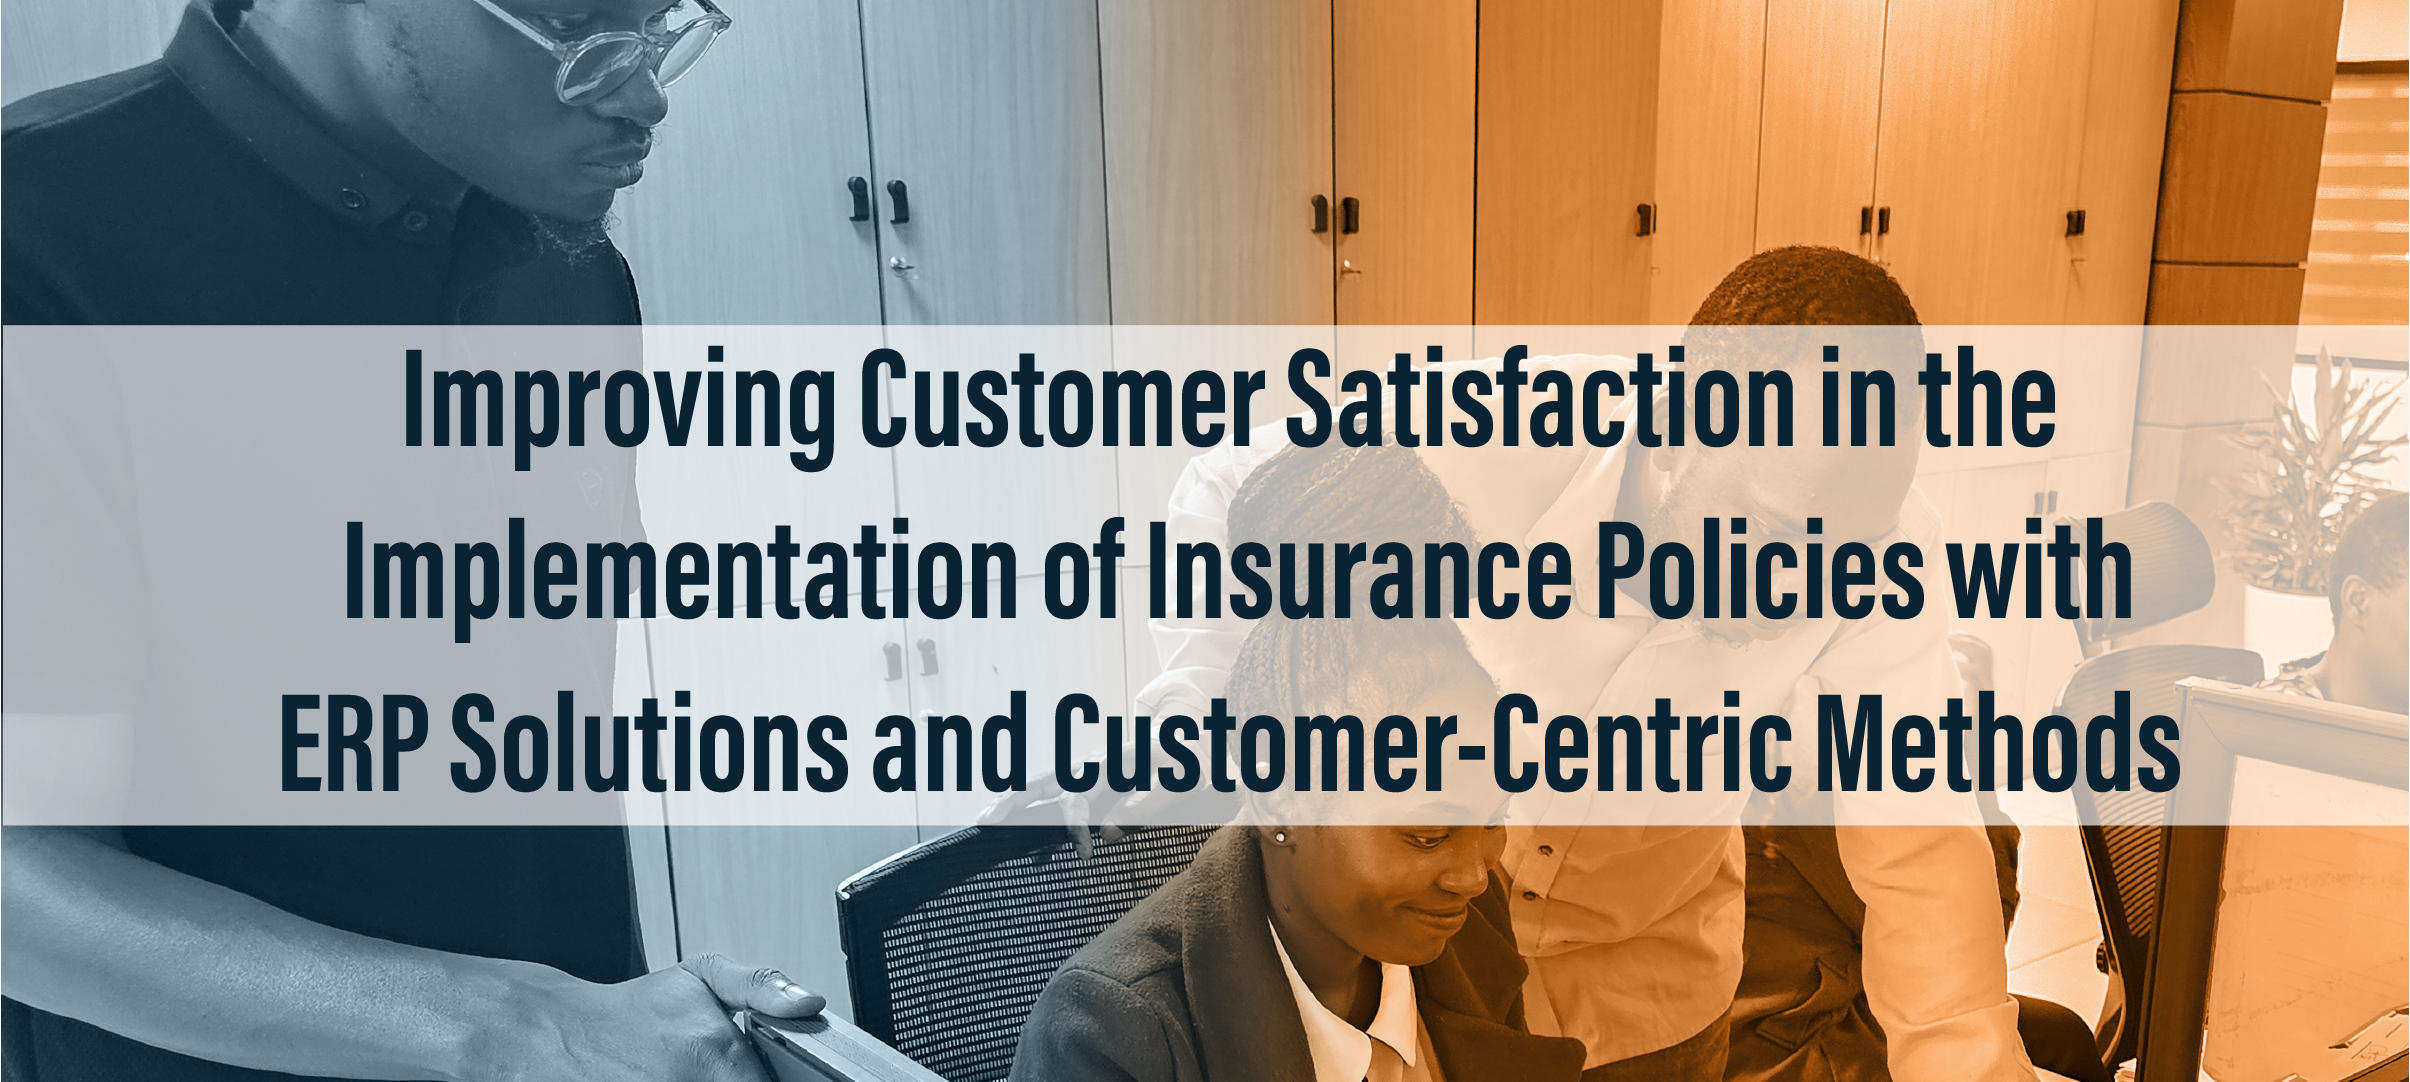 Improving Customer satisfaction in the implementation of insurance policies blog post cover || ICON Limited